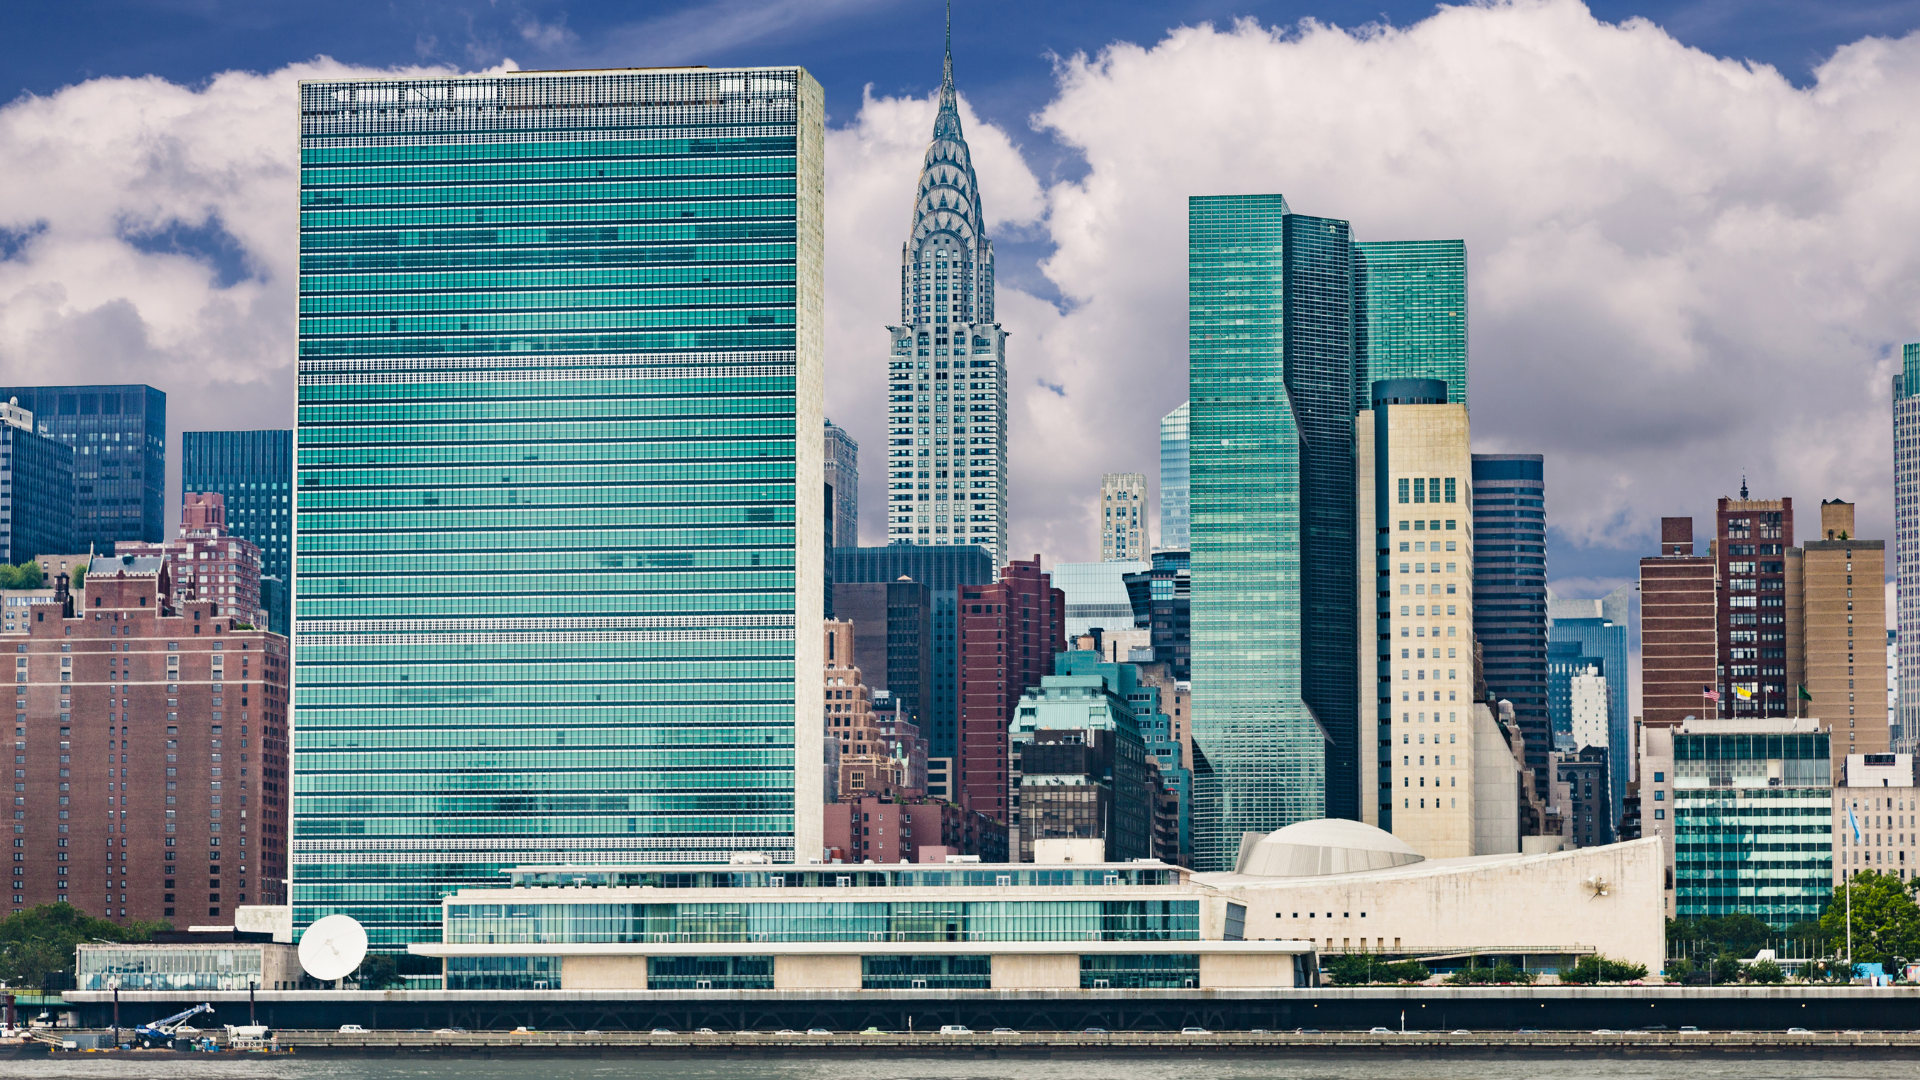 Photo of the UN headquarters in New York